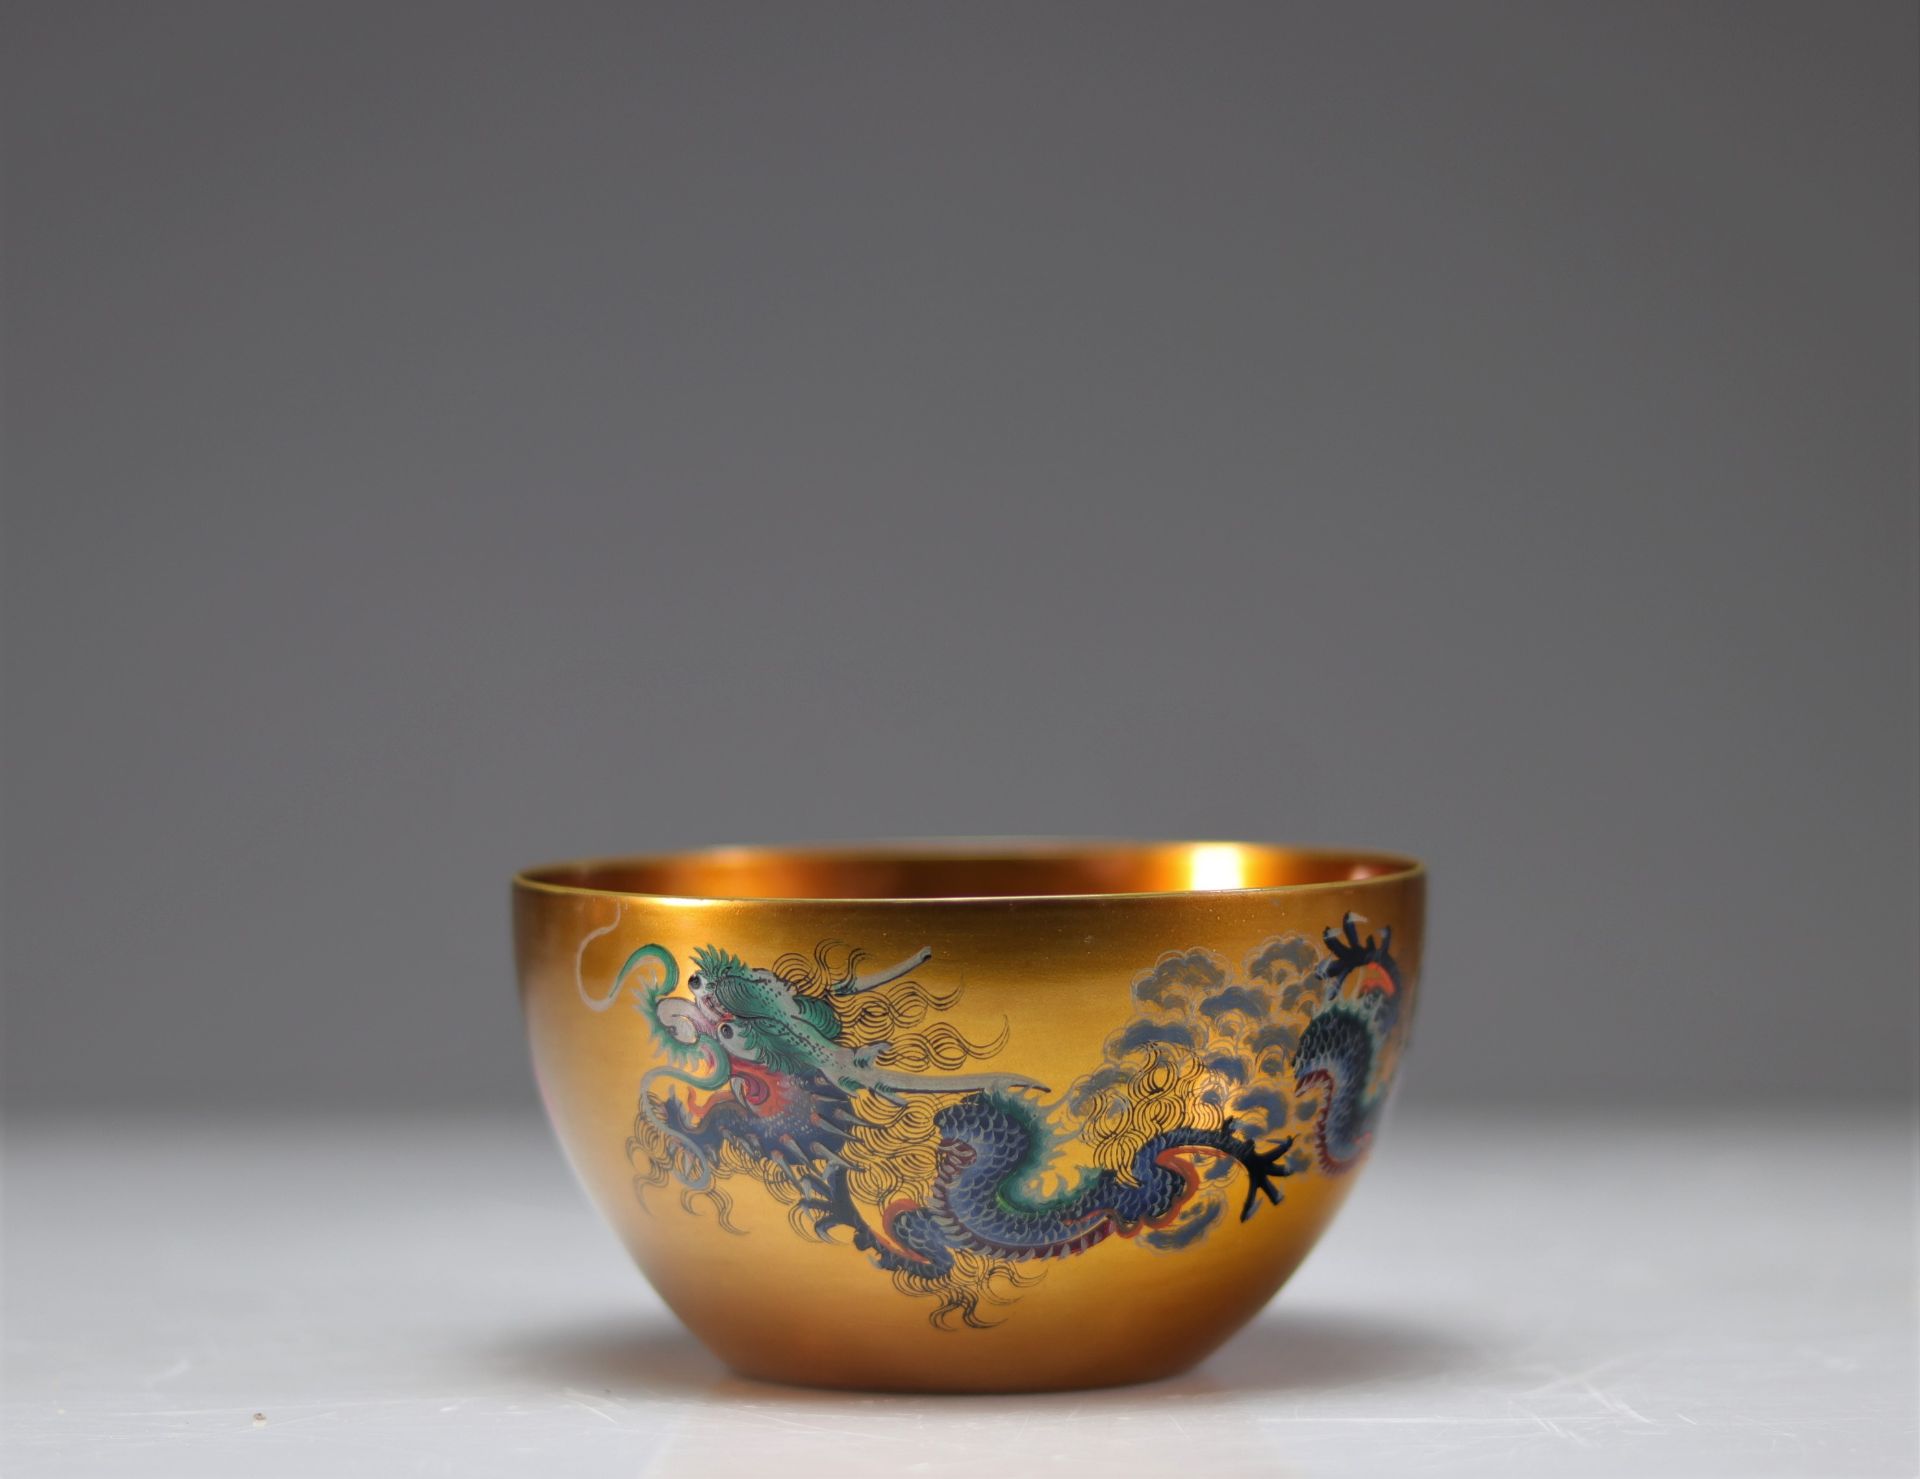 Lot of bowls (6) in Fuzhou lacquer decorated with dragons - Image 3 of 5